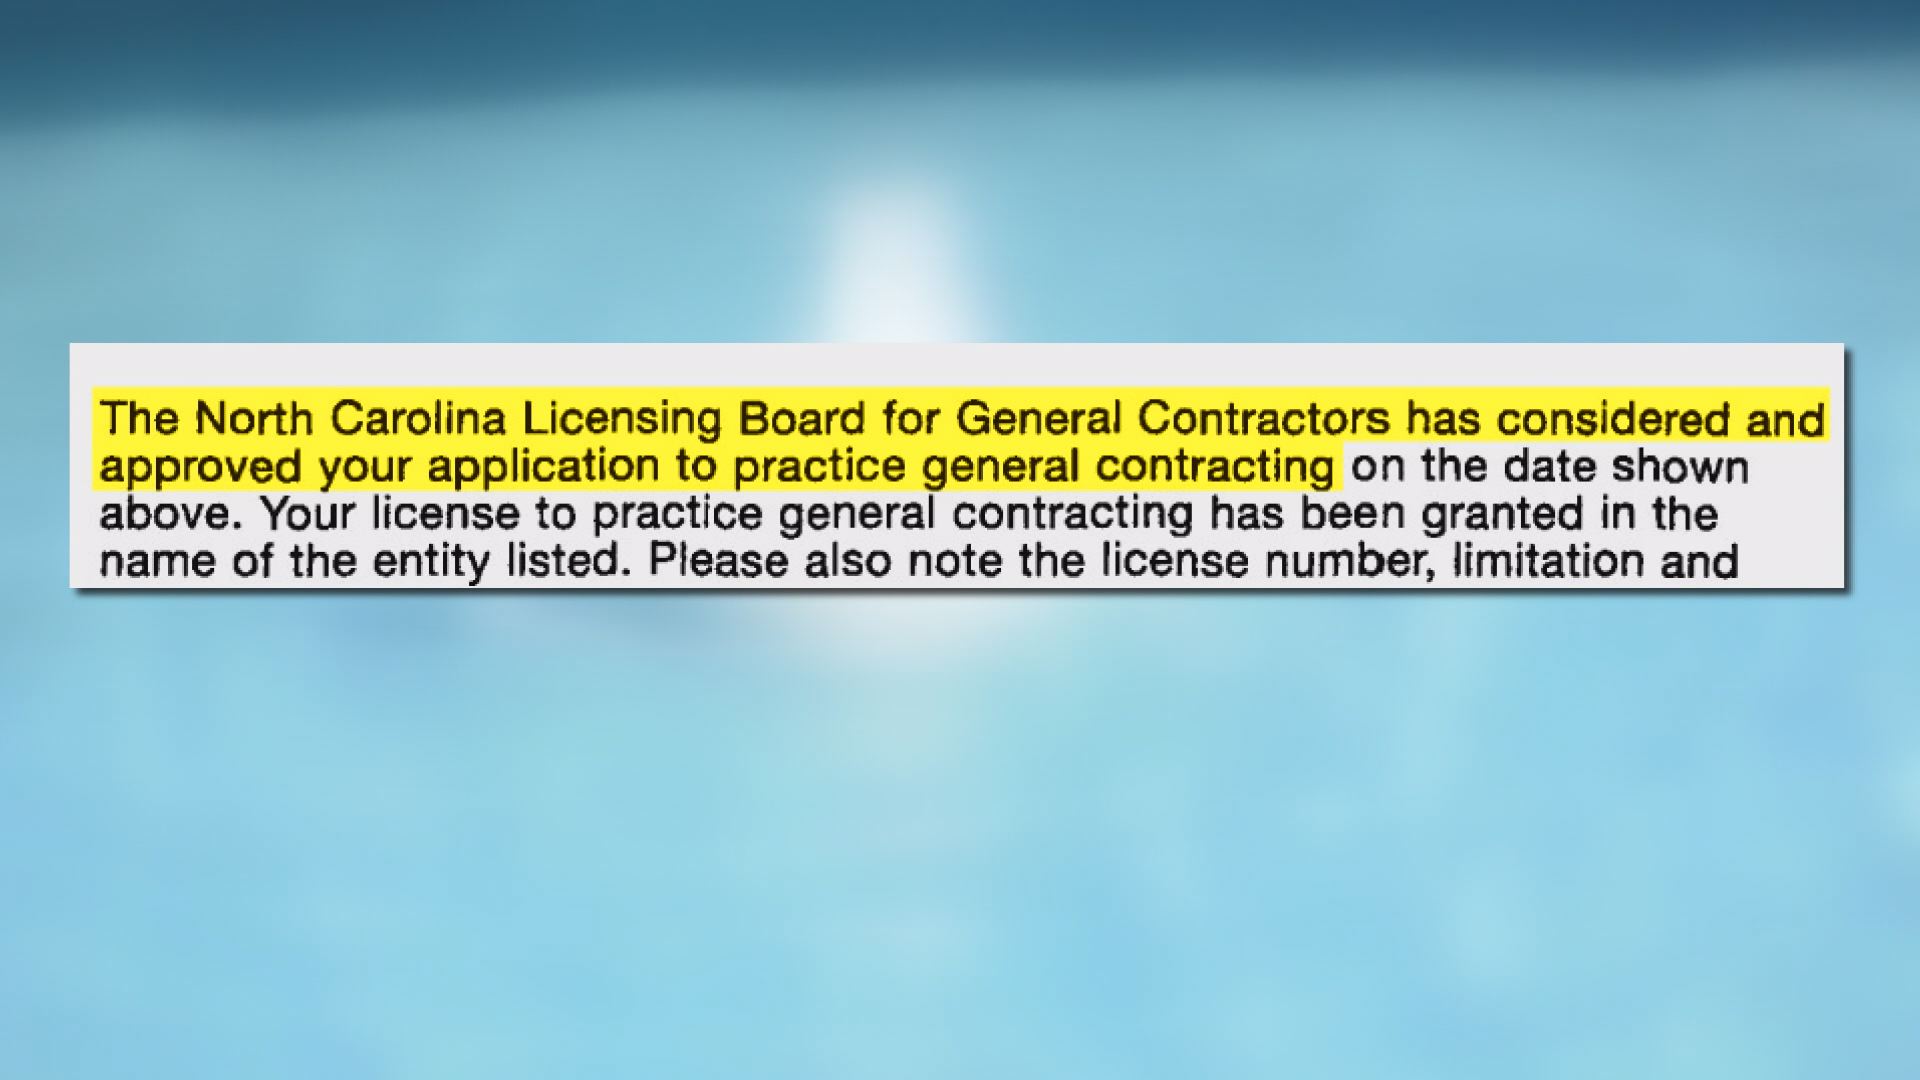 Pool Contractor Slipped Through Nc Licensing Board Despite Bankruptcies Lawsuit